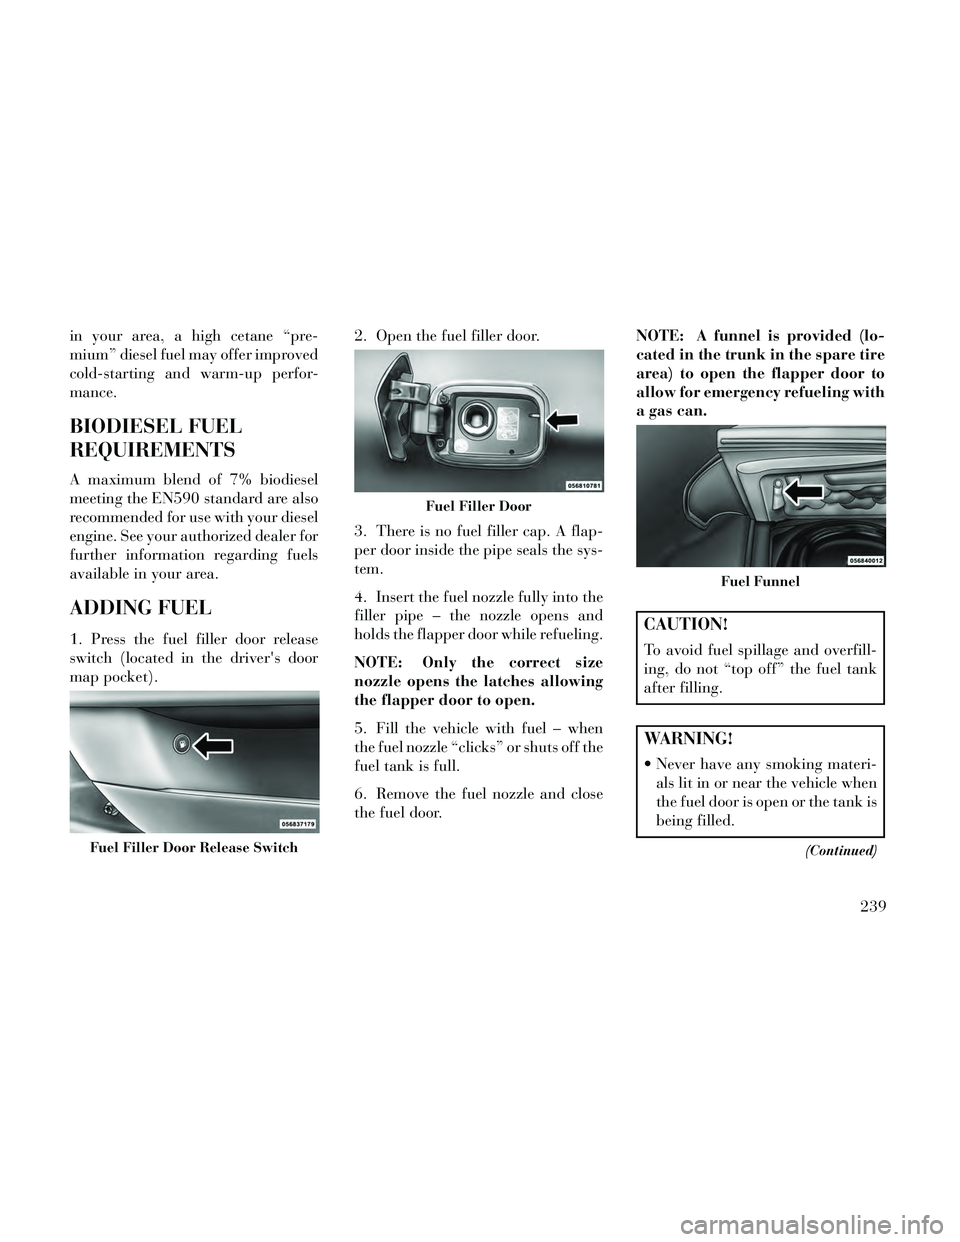 Lancia Thema 2014  Owner handbook (in English) in your area, a high cetane “pre-
mium” diesel fuel may offer improved
cold-starting and warm-up perfor-
mance.
BIODIESEL FUEL
REQUIREMENTS
A maximum blend of 7% biodiesel
meeting the EN590 standa